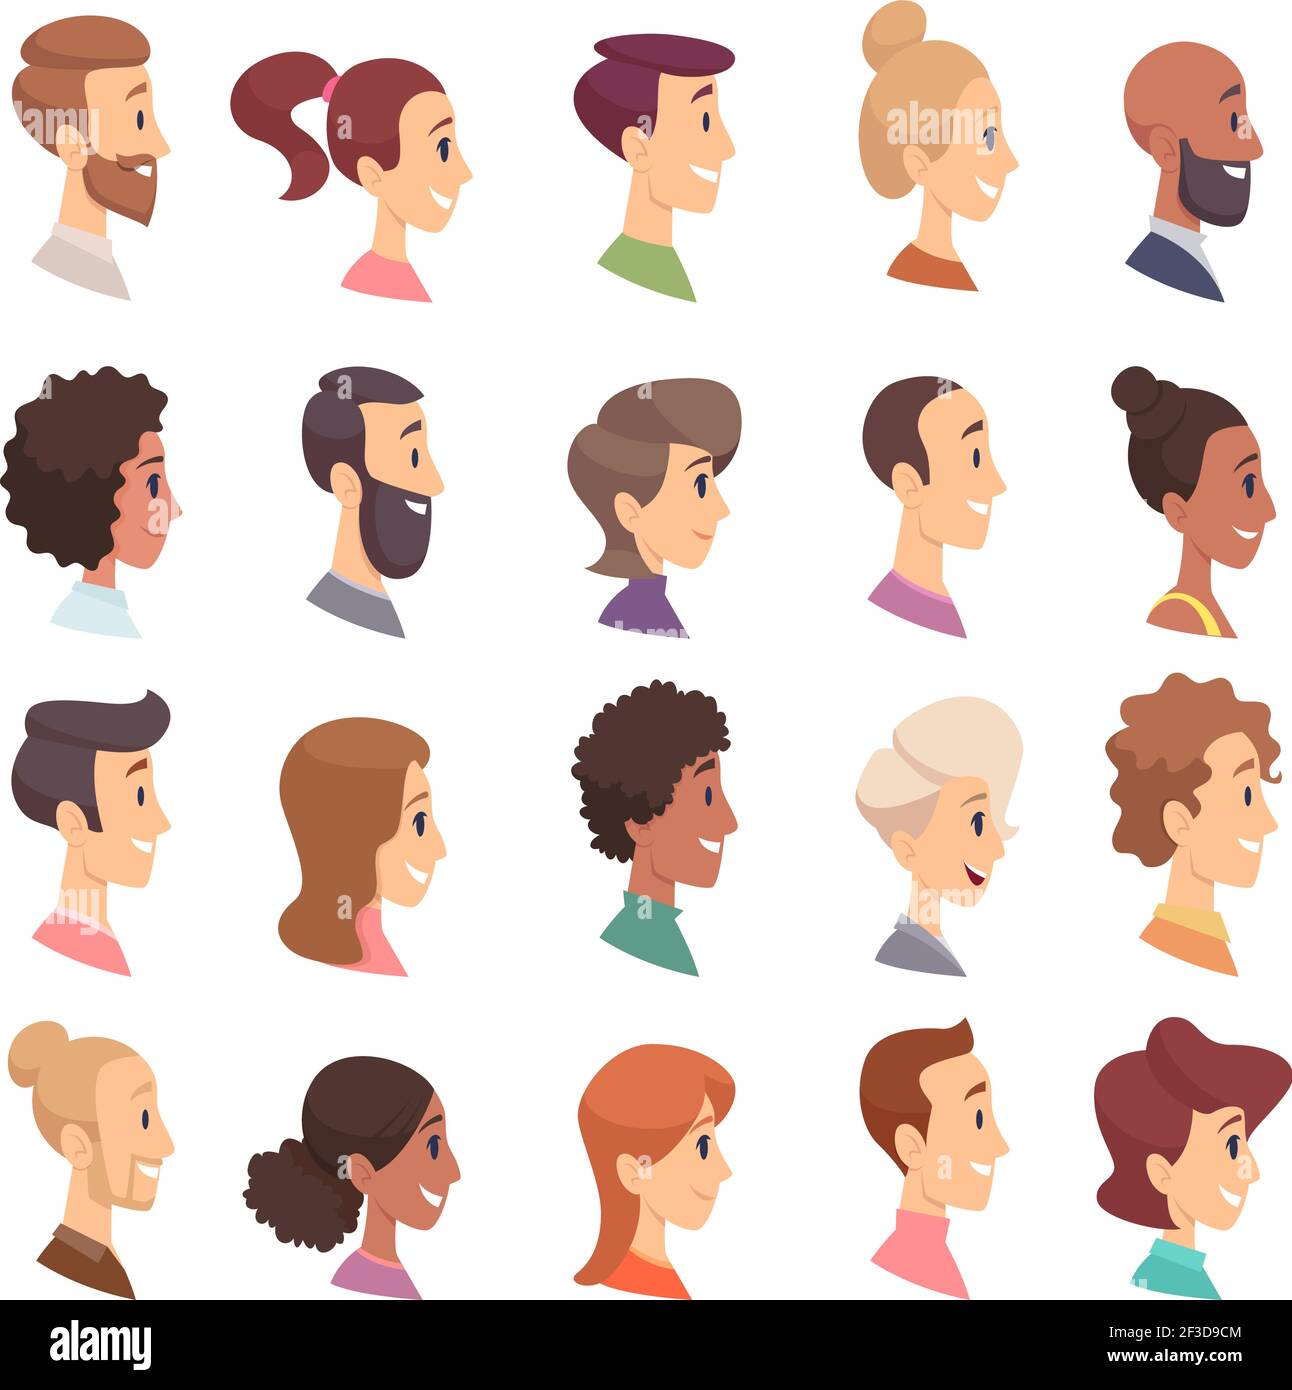 Faces profile. Avatars people expression simple heads male and female vector persons cartoon illustrations Stock Vector